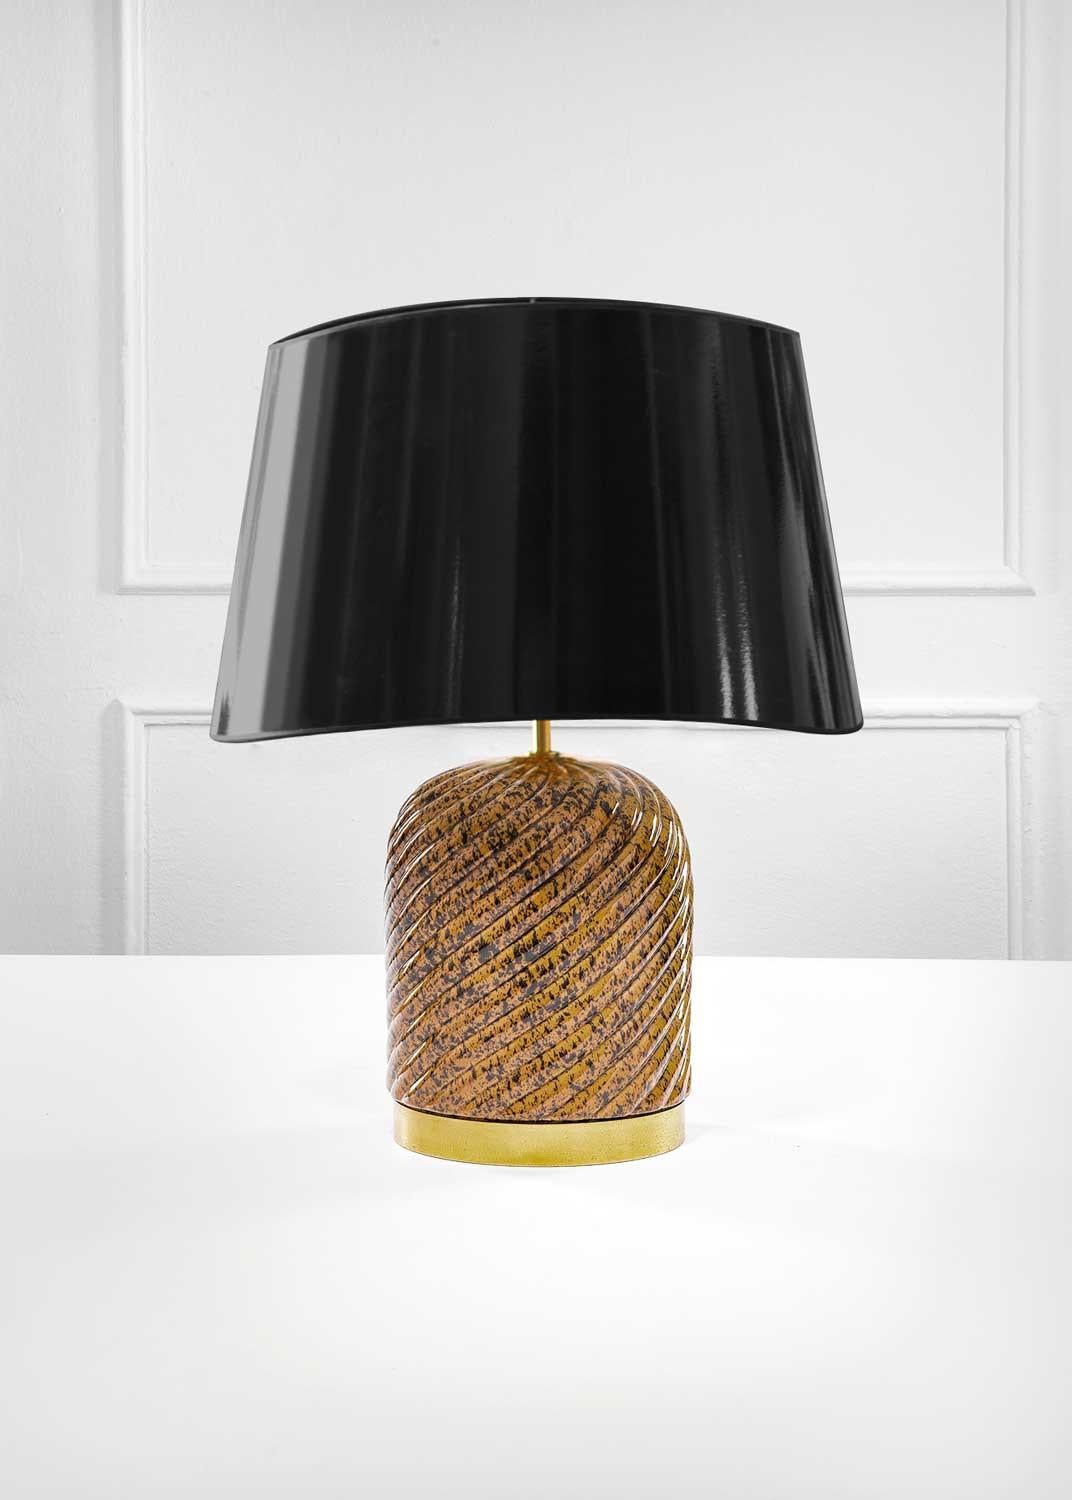 TOMMASO BARBI TABLE LAMP 1970
Table lamp by Tommaso Barbi in glazed ceramic and brass. Complete with lampshade in vinyl. Italian production 1970. 
This vintage table lamp serves as a striking focal point in any room, whether placed on a bedside